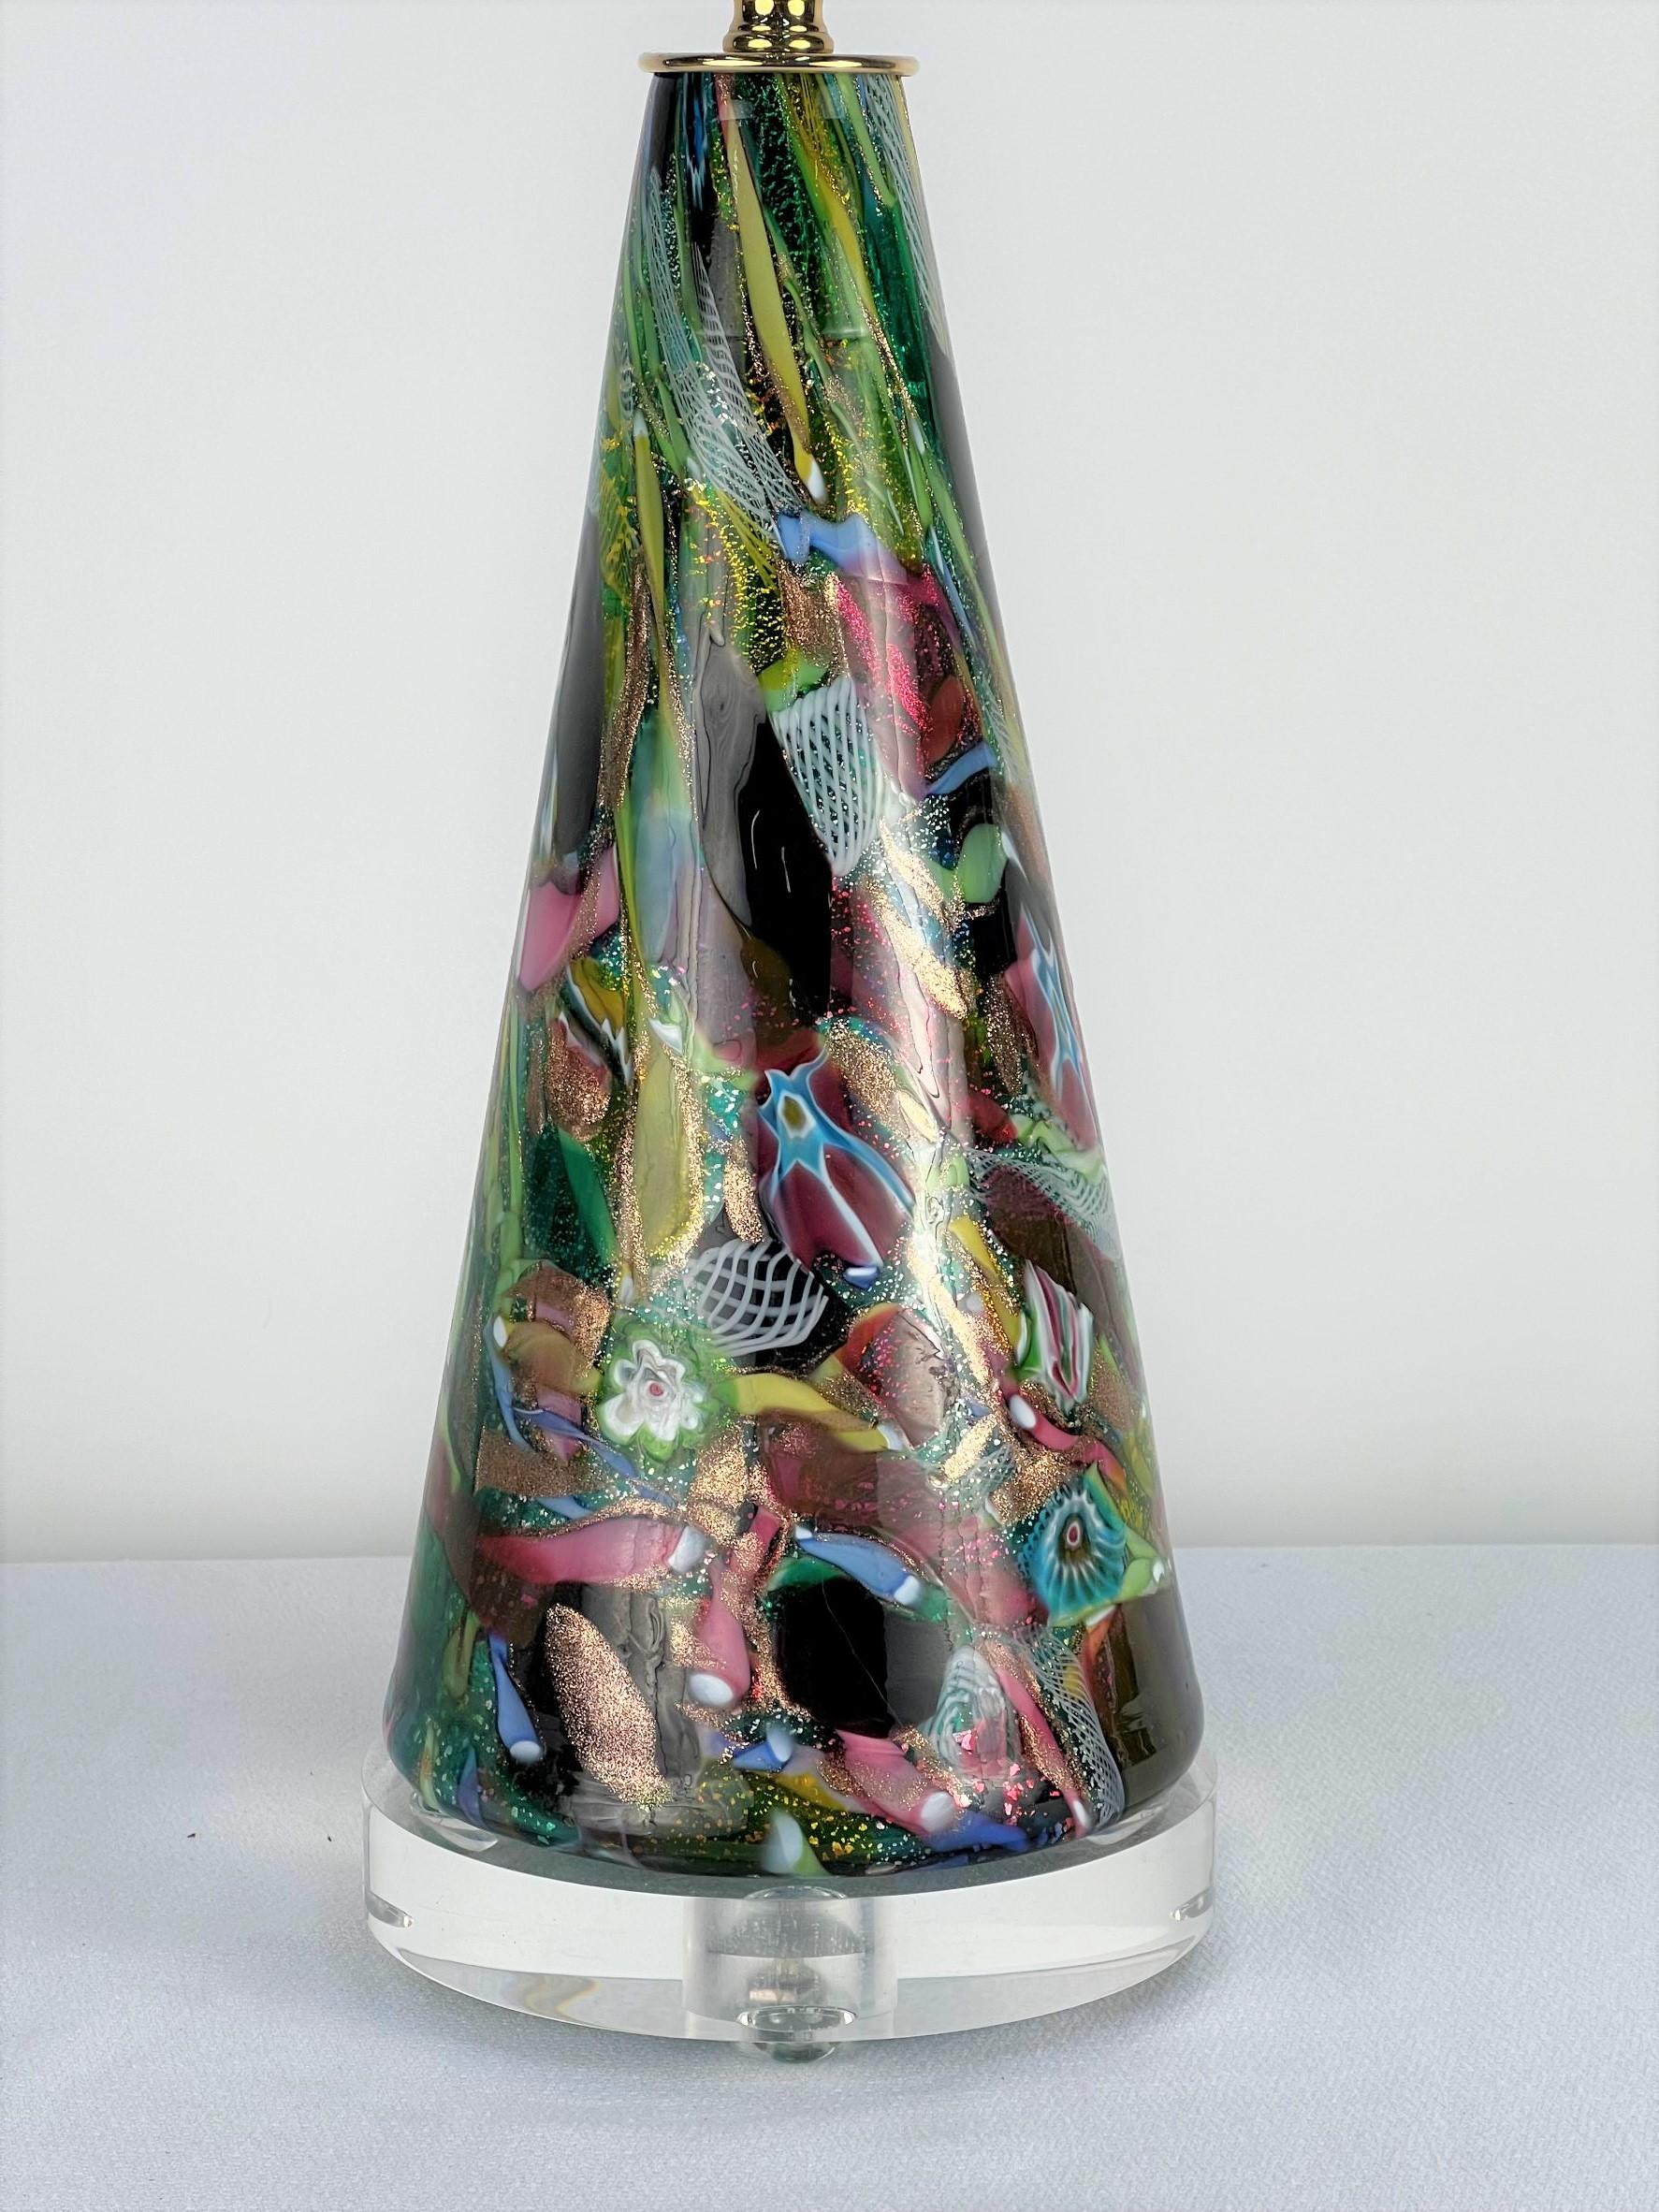 This classic vintage Millefiori conical shape table lamp base features gold flecks, aventurine ribbons, and an array of colorful art glass. The process of taking left over pieces of art glass and heat rolling them into bowls, trays, and in this case